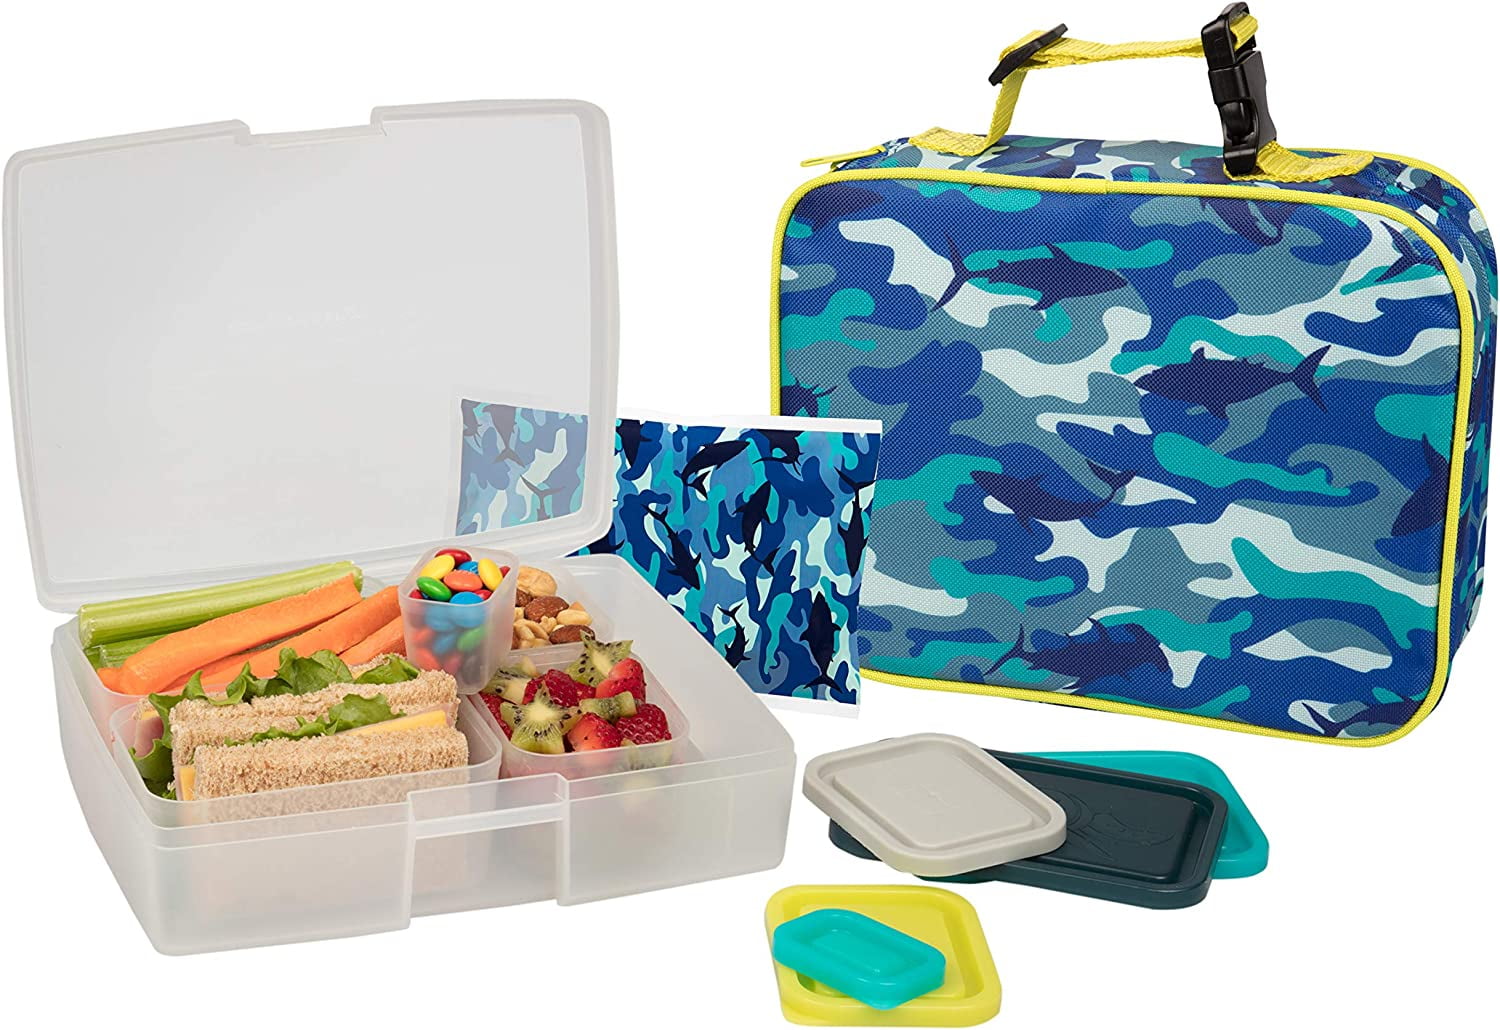 Bentology Lunch Box for Boys - Kids Insulated, Durable Lunchbox Tote Bag  Fits Bento Boxes, Nesting Containers w/Lids & Bottles, Back to School  Sleeve